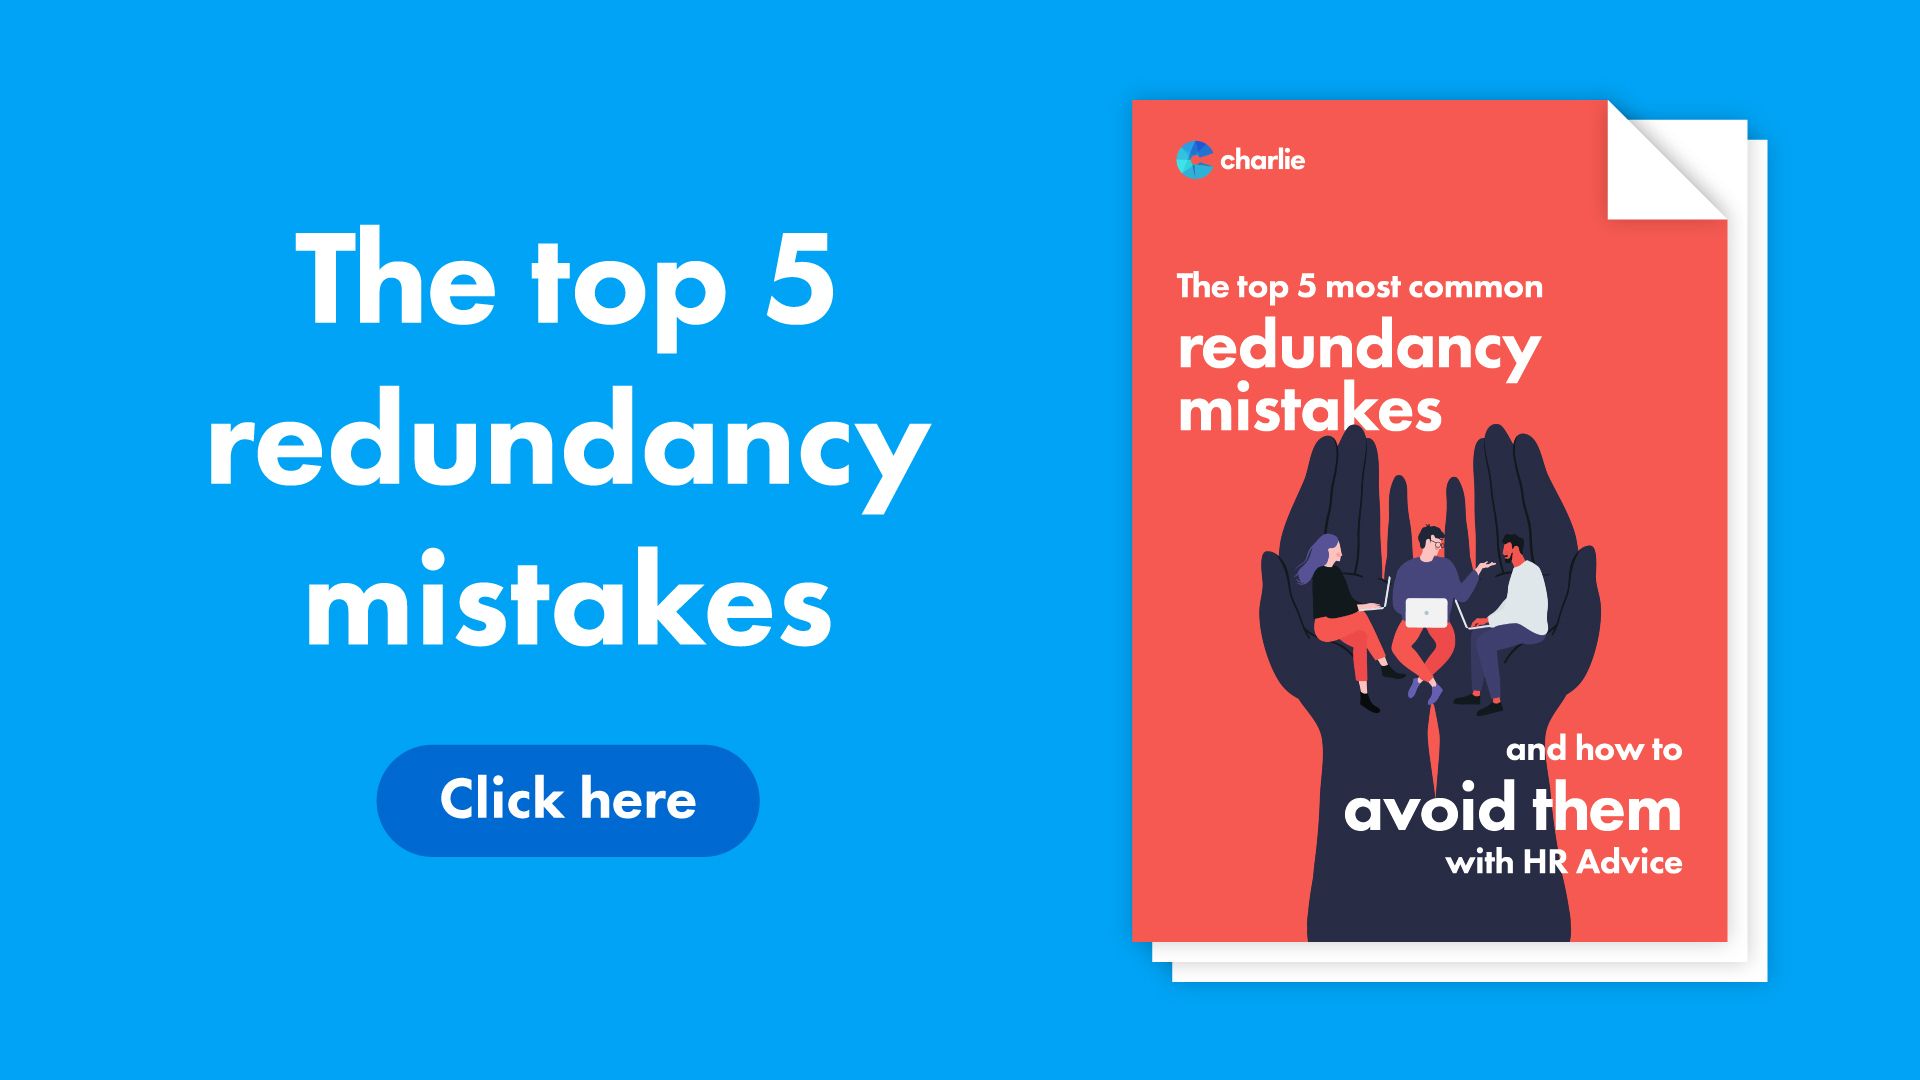 Click here to download the guide to the 5 redundancy mistakes